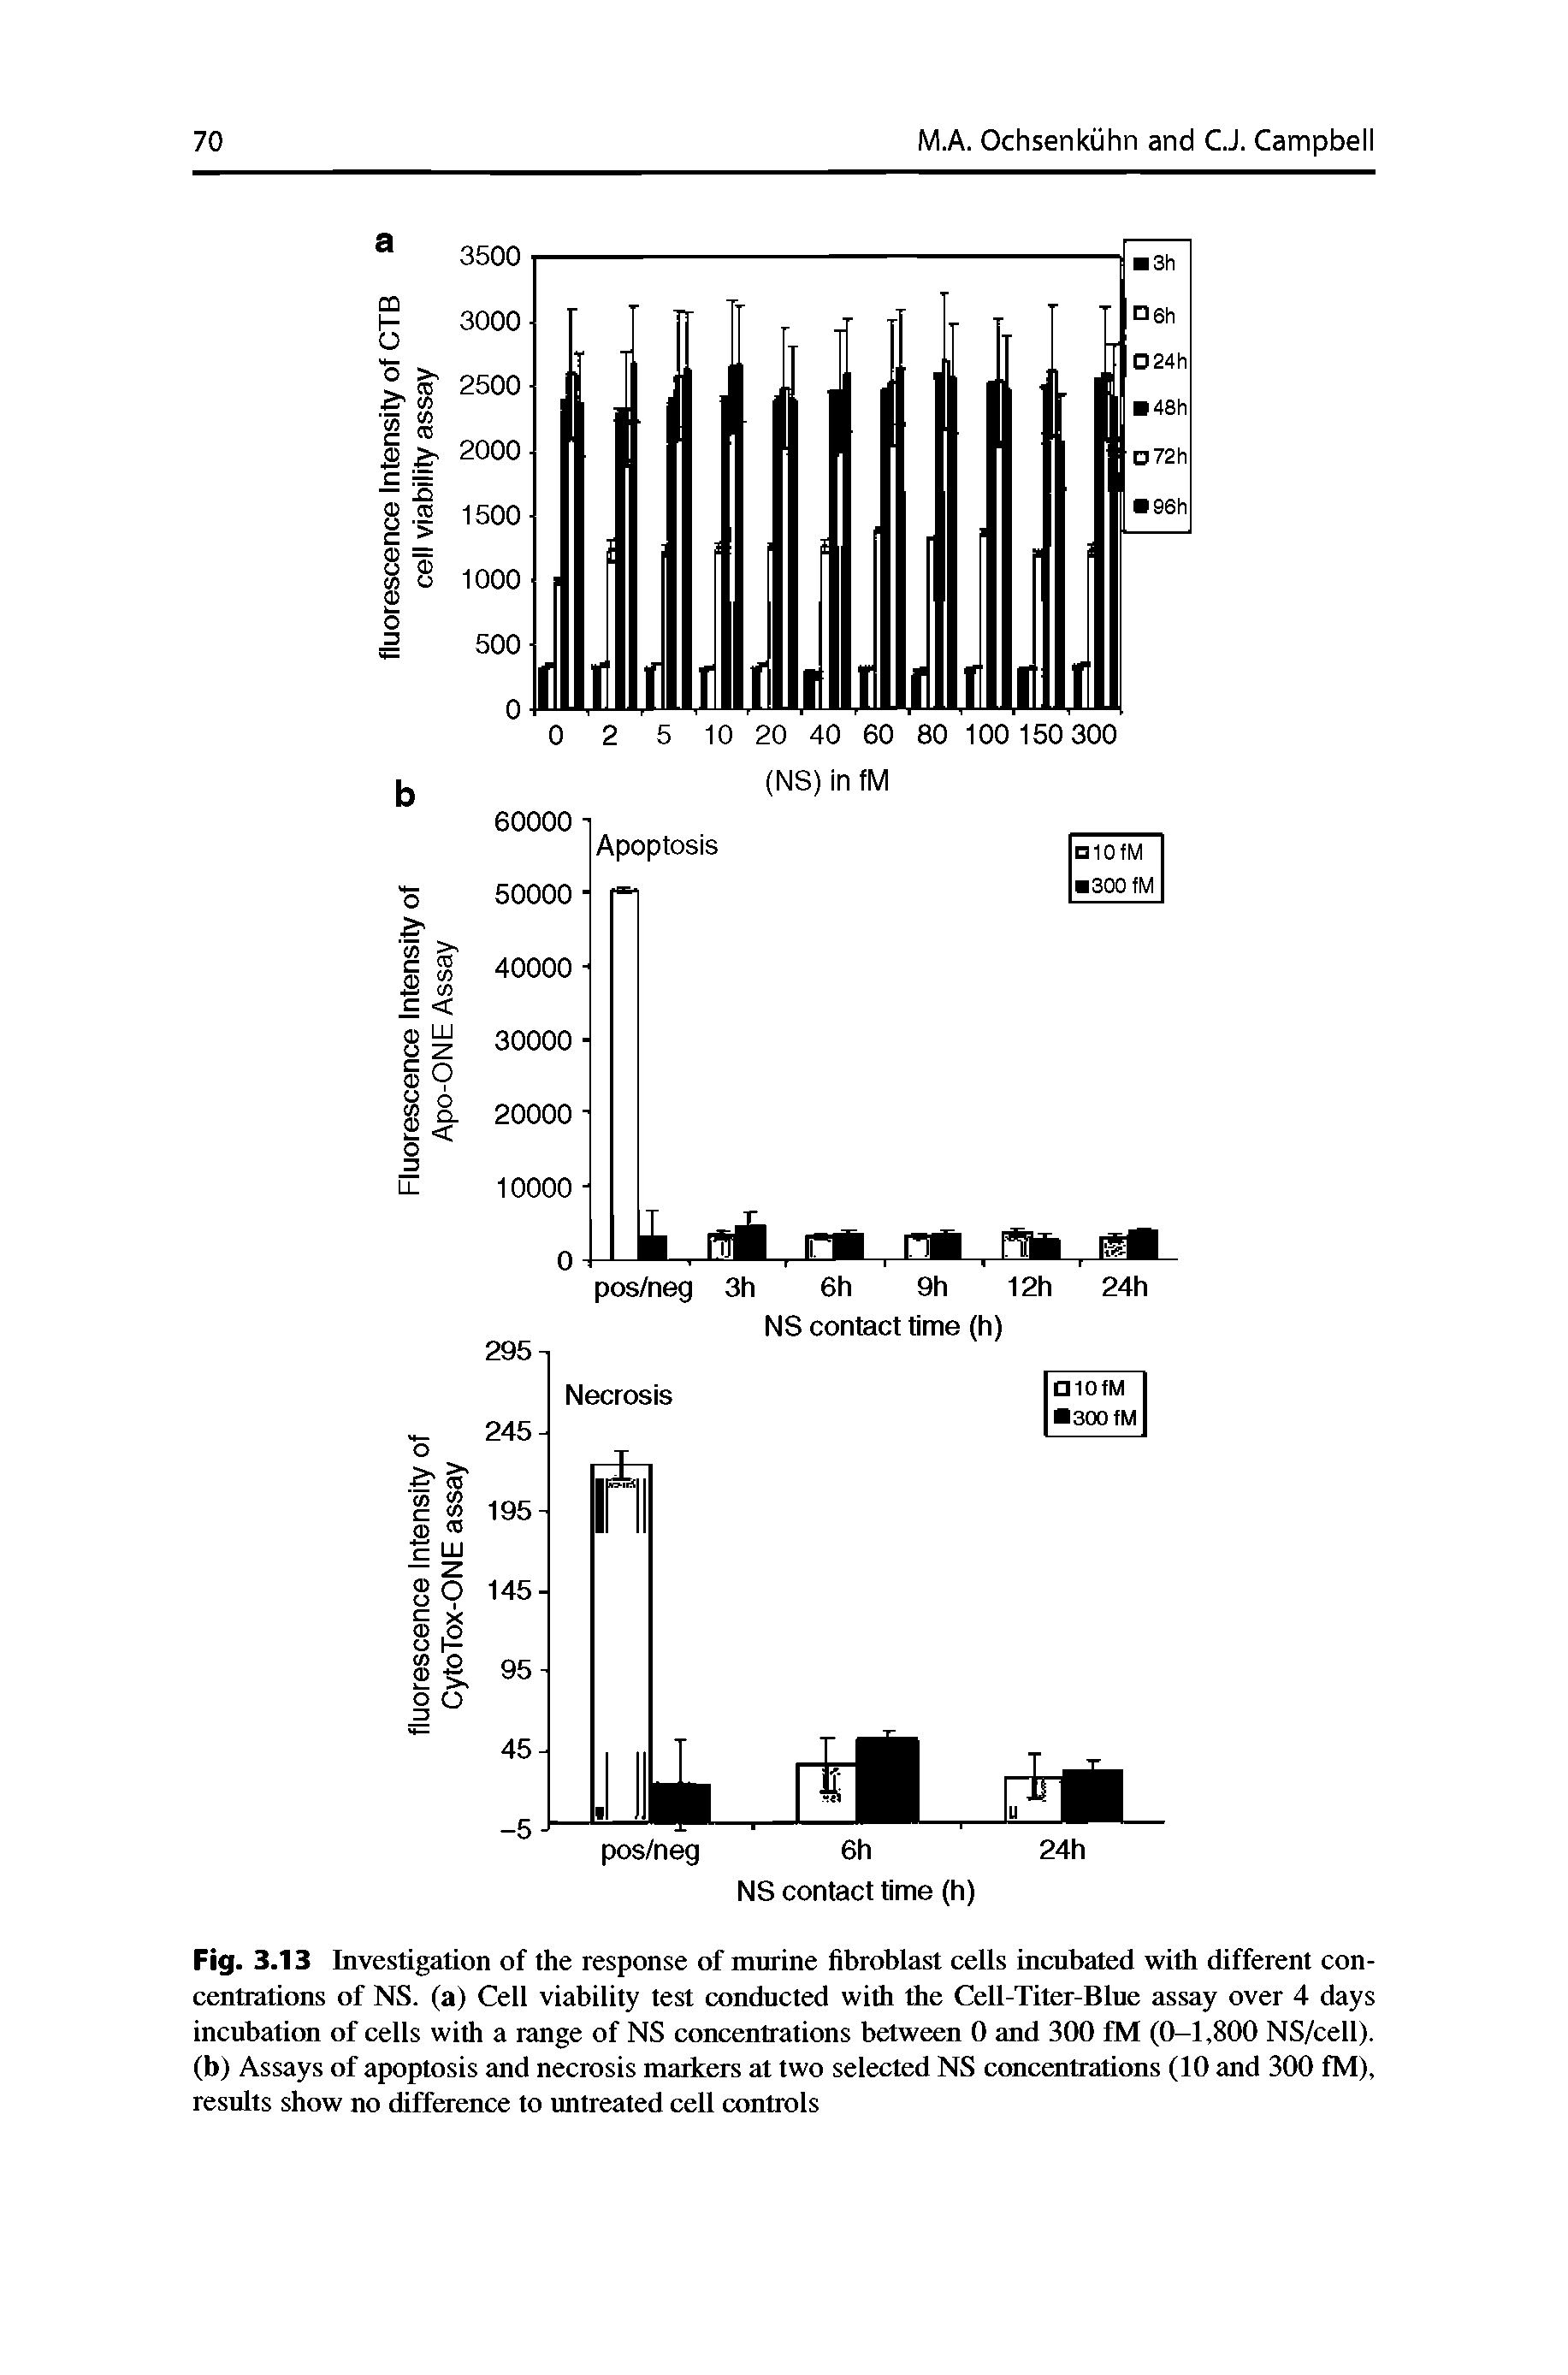 Fig. 3.13 Investigation of the response of murine fibroblast cells incubated with different concentrations of NS. (a) Cell viability test conducted with the Cell-Titer-Blue assay over 4 days incubation of cells with a range of NS concentrations between 0 and 300 fM (0-1,800 NS/cell). (b) Assays of apoptosis and necrosis markers at two selected NS concentrations (10 and 300 fM), results show no difference to untreated cell controls...